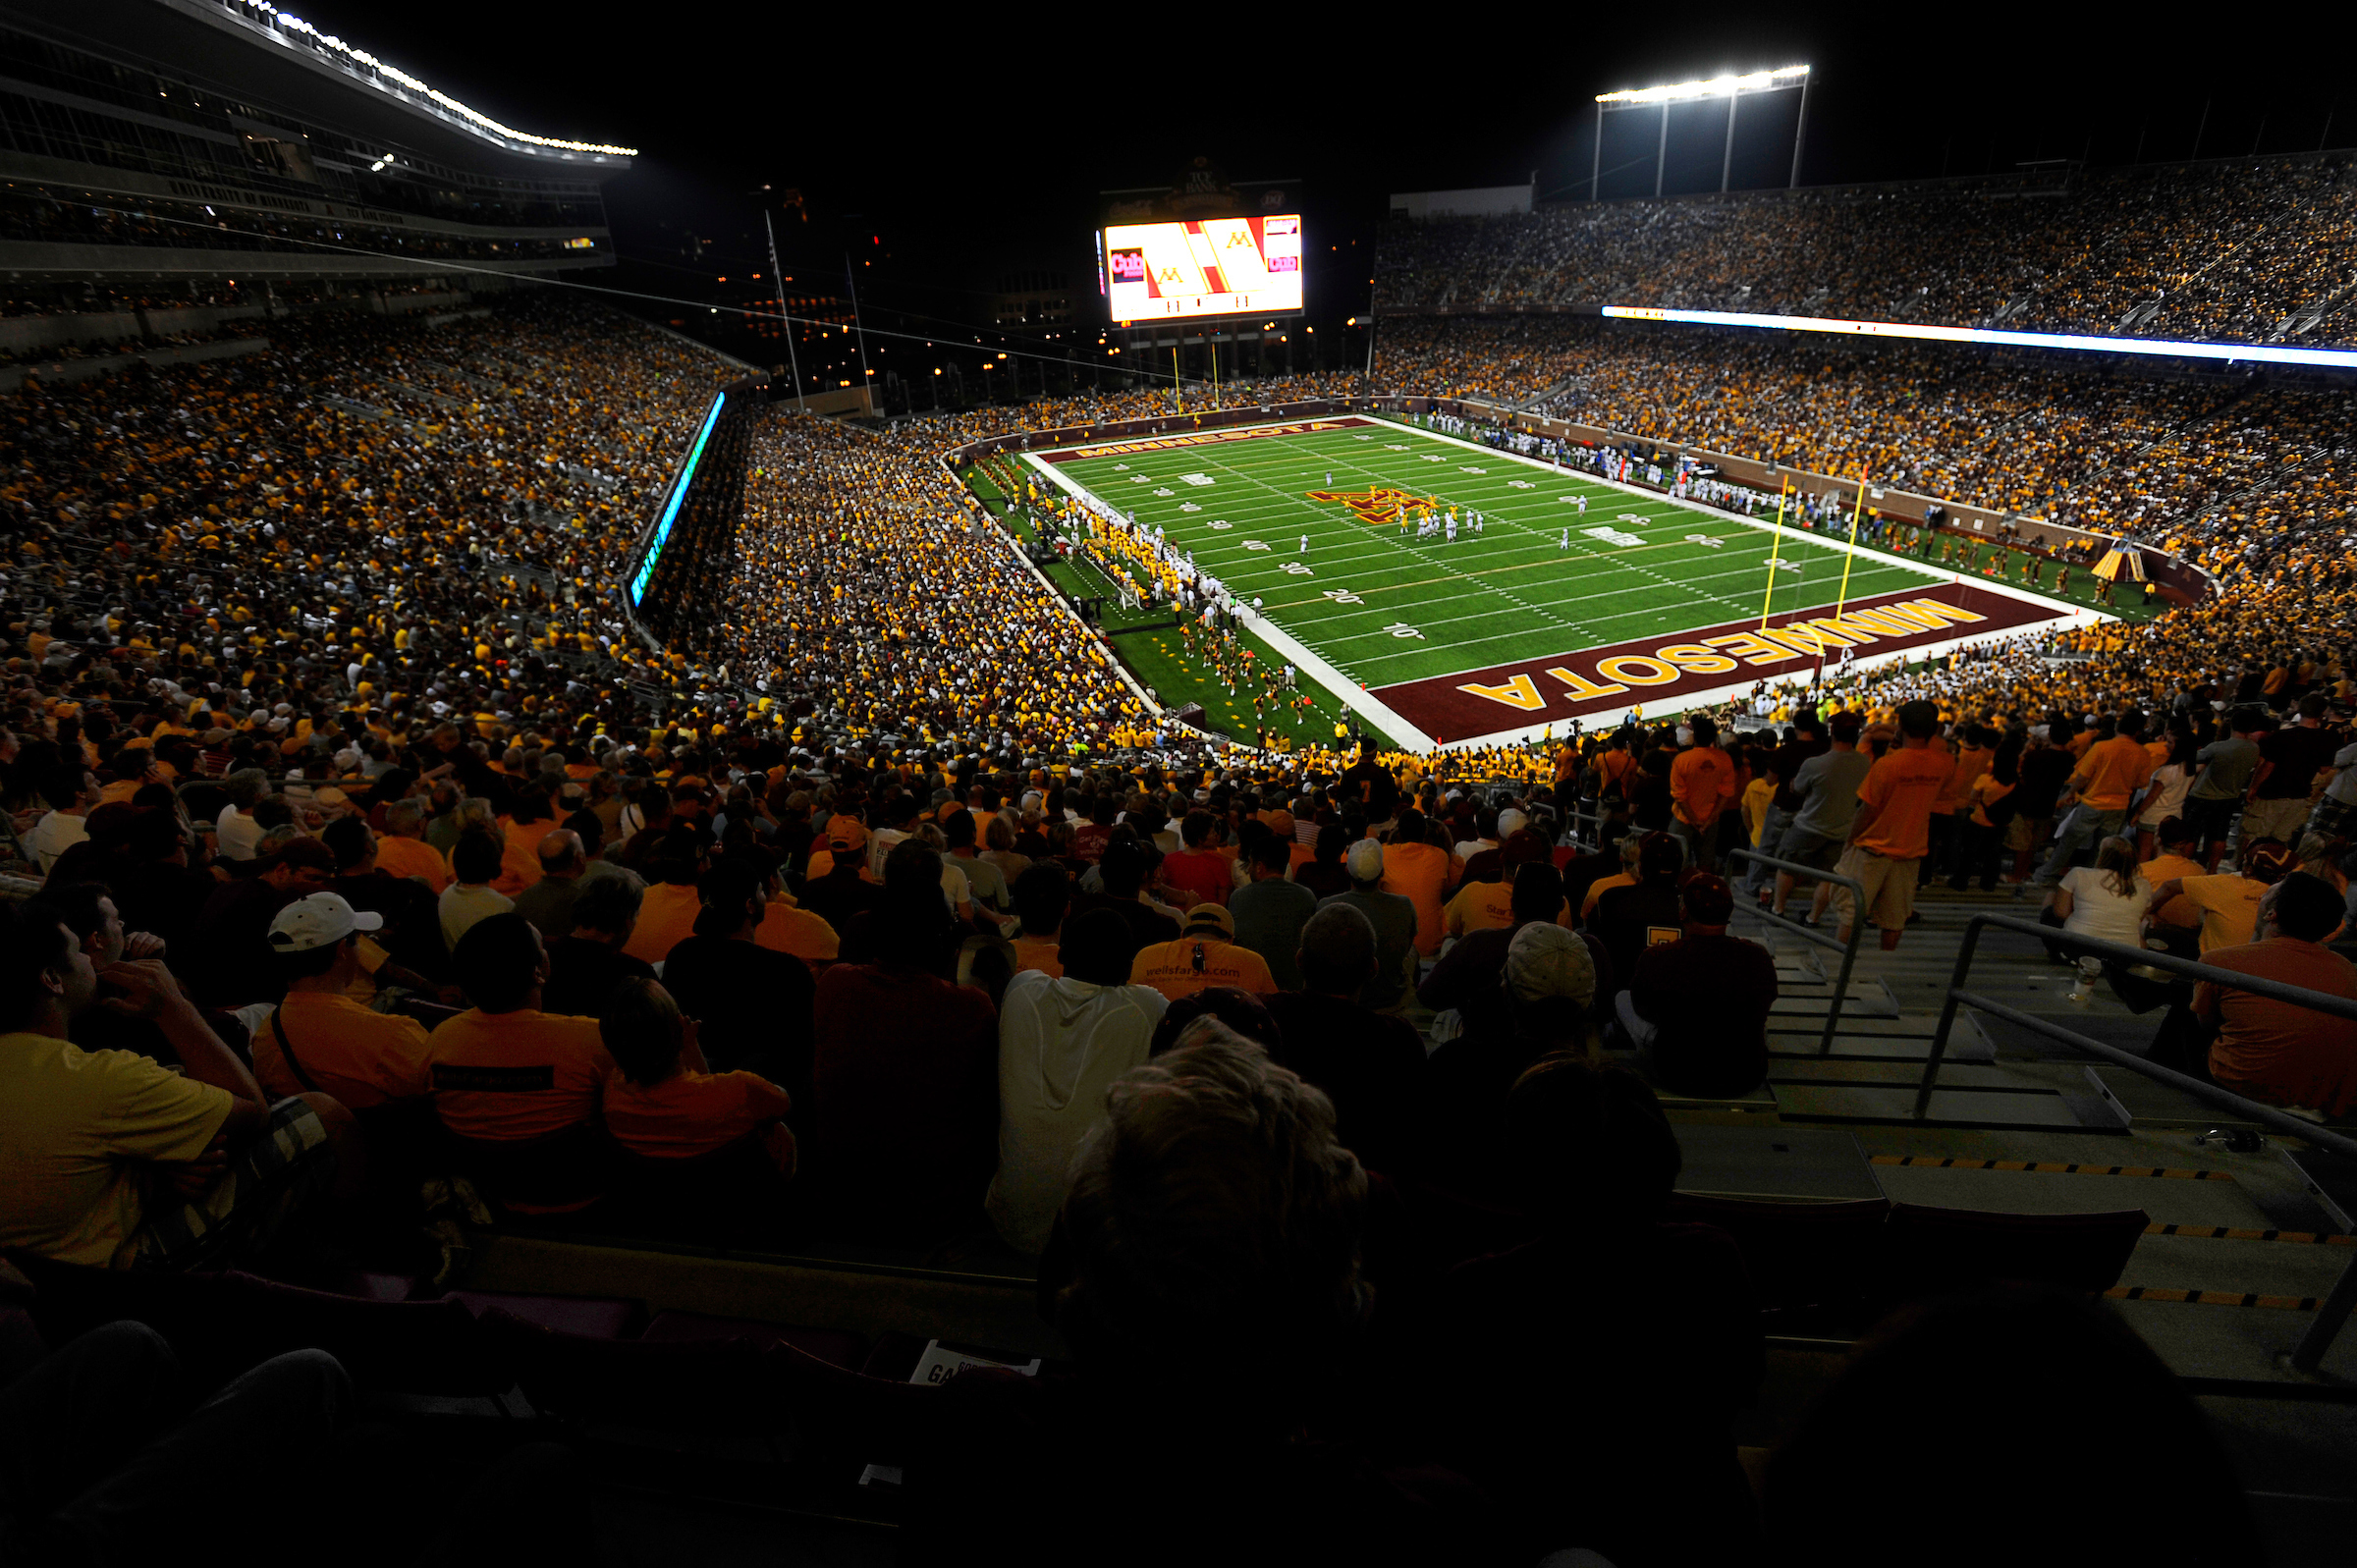 A wideangle shot of a capacity crowd watching a football game at night under the lights at Huntington Bank Stadium